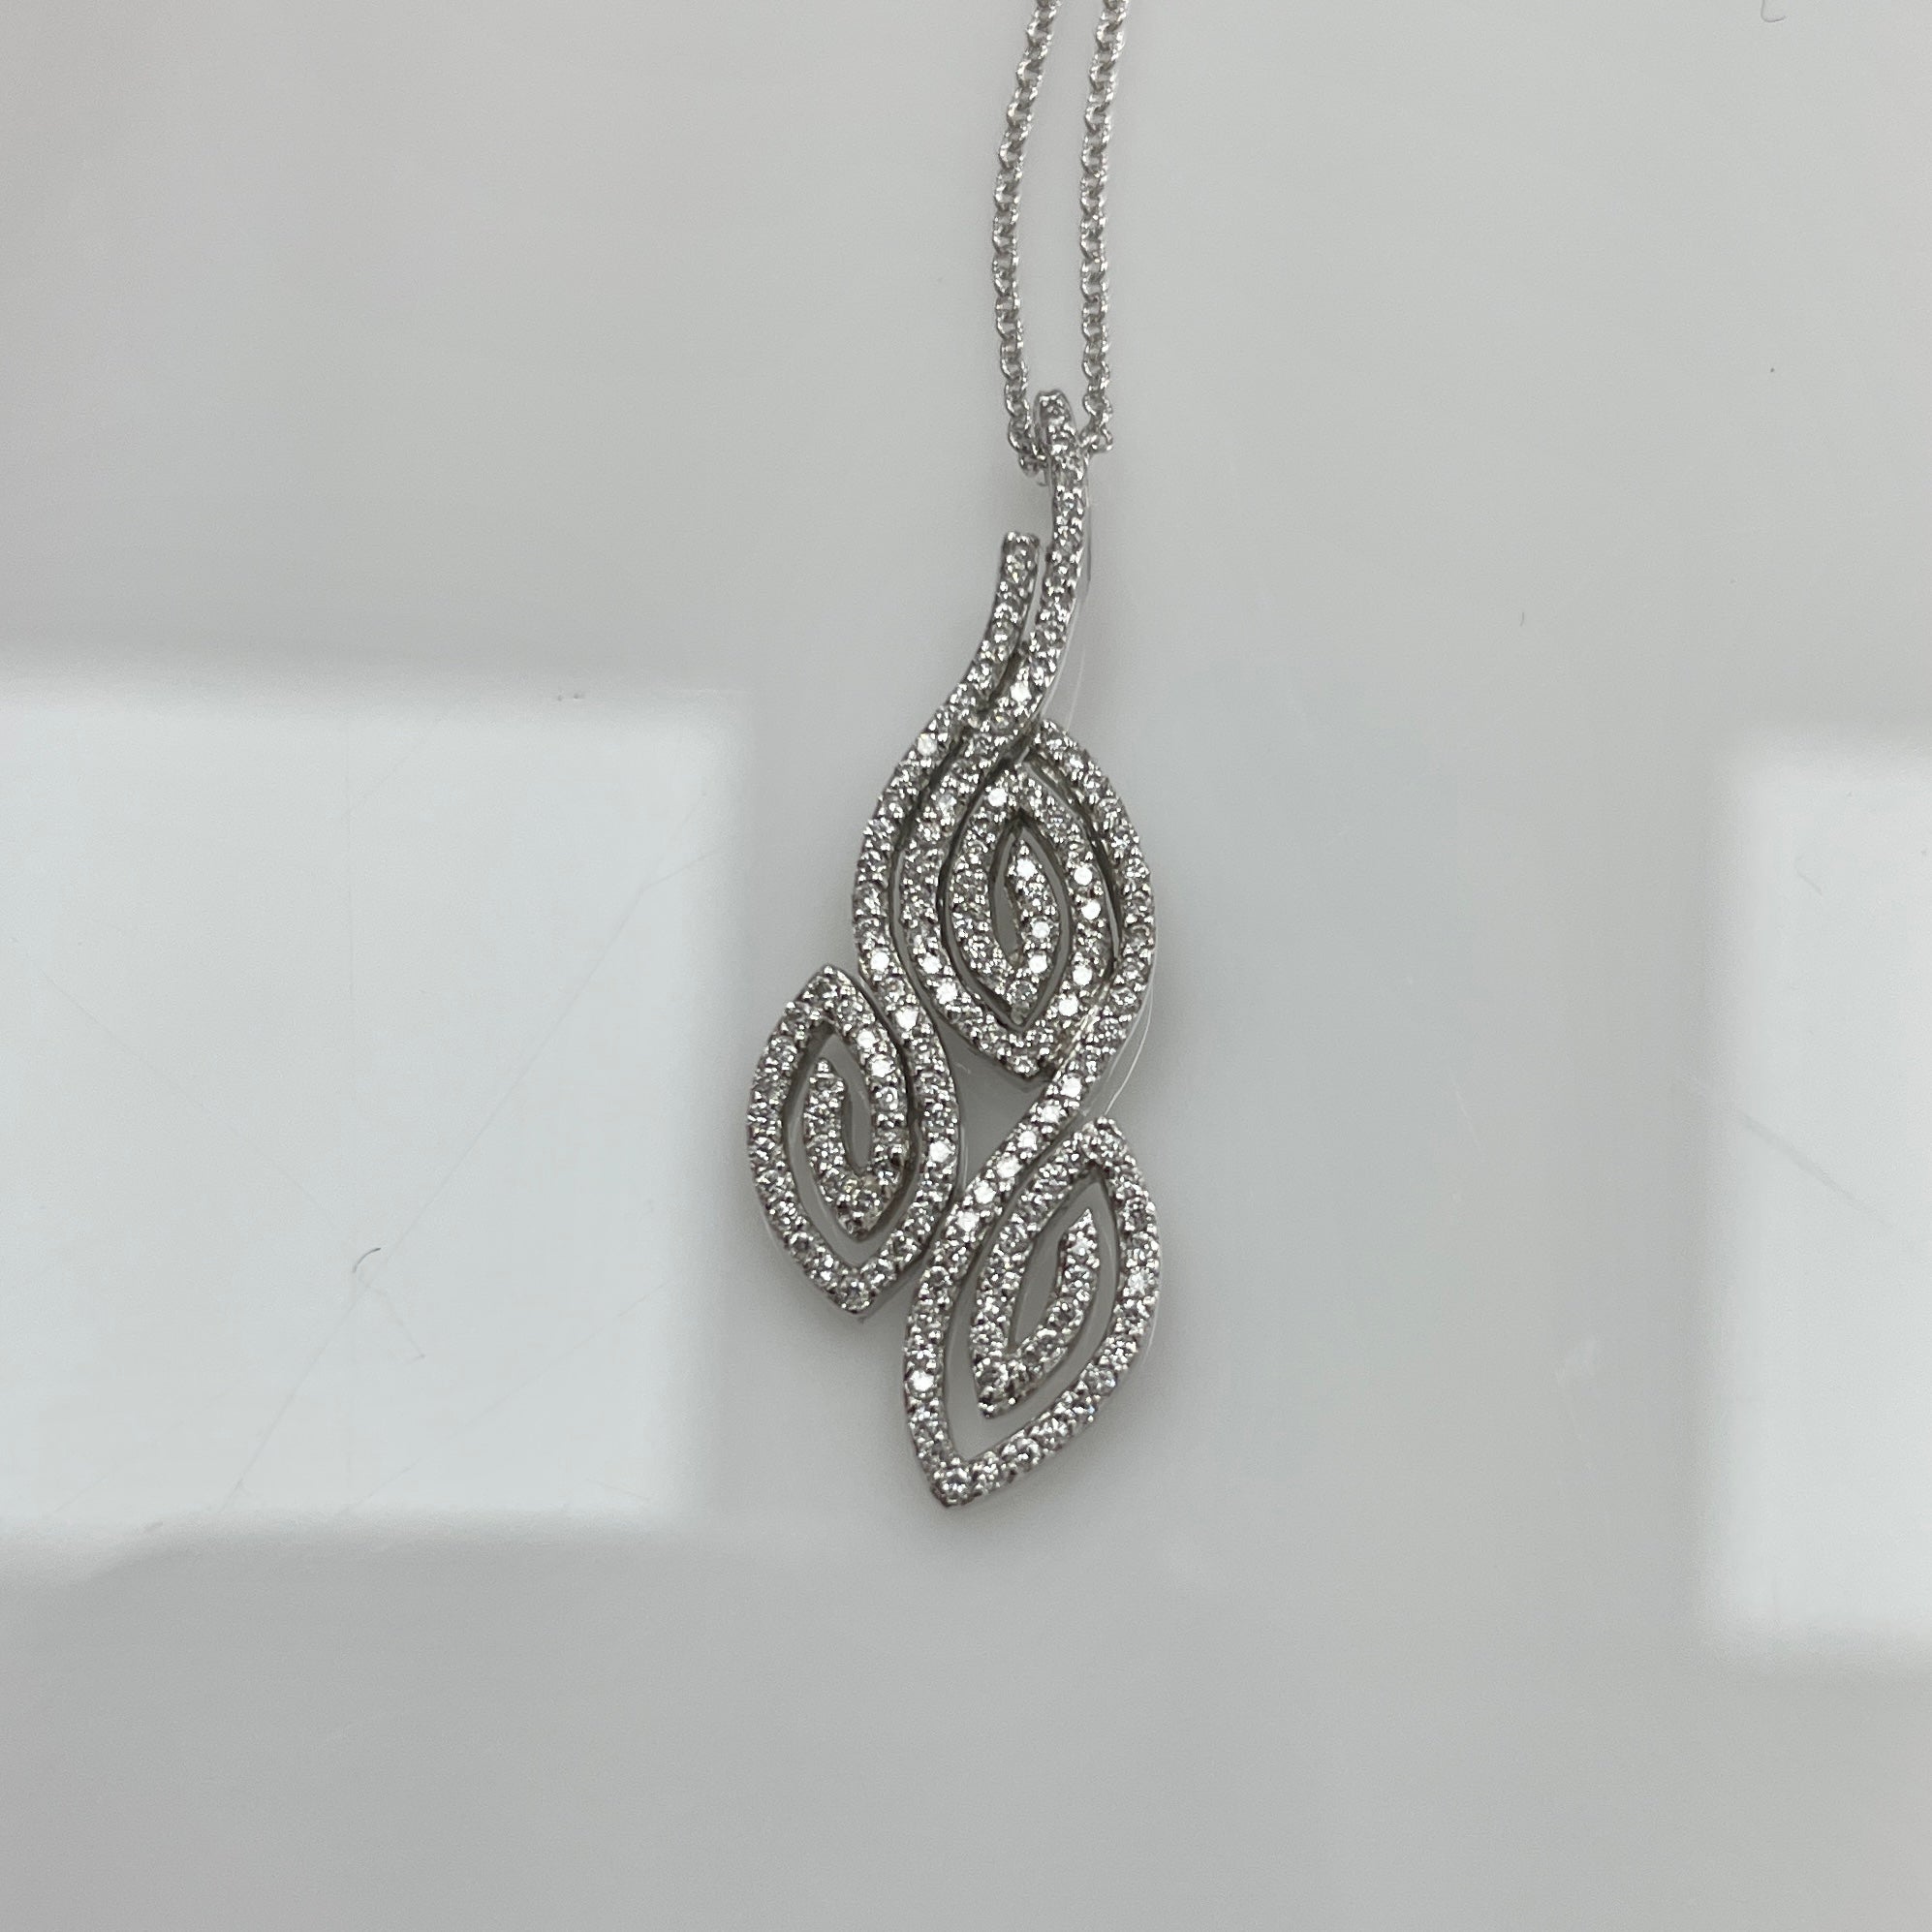 An intricately designed pendant with 0.44Ct of diamonds set in 18K white gold. 